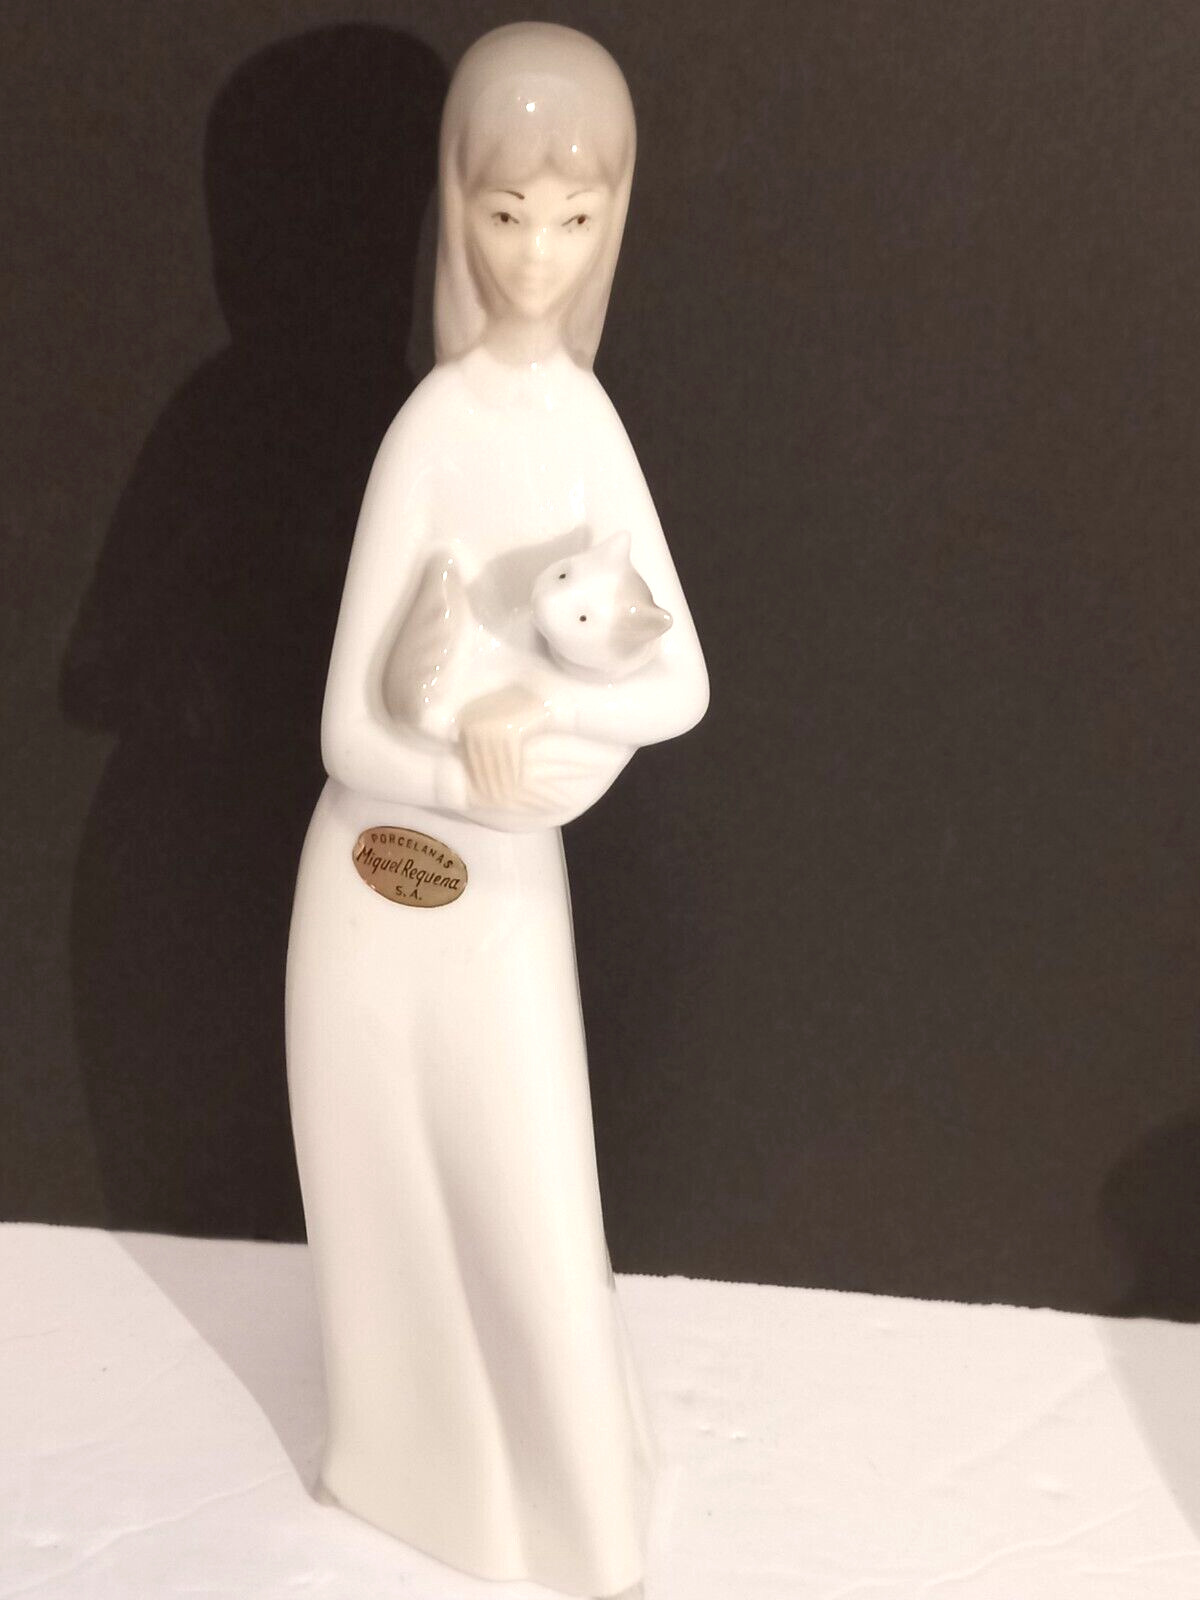 Retro Miguel Requena Figurine With Kitty Porcelain Lladro Style